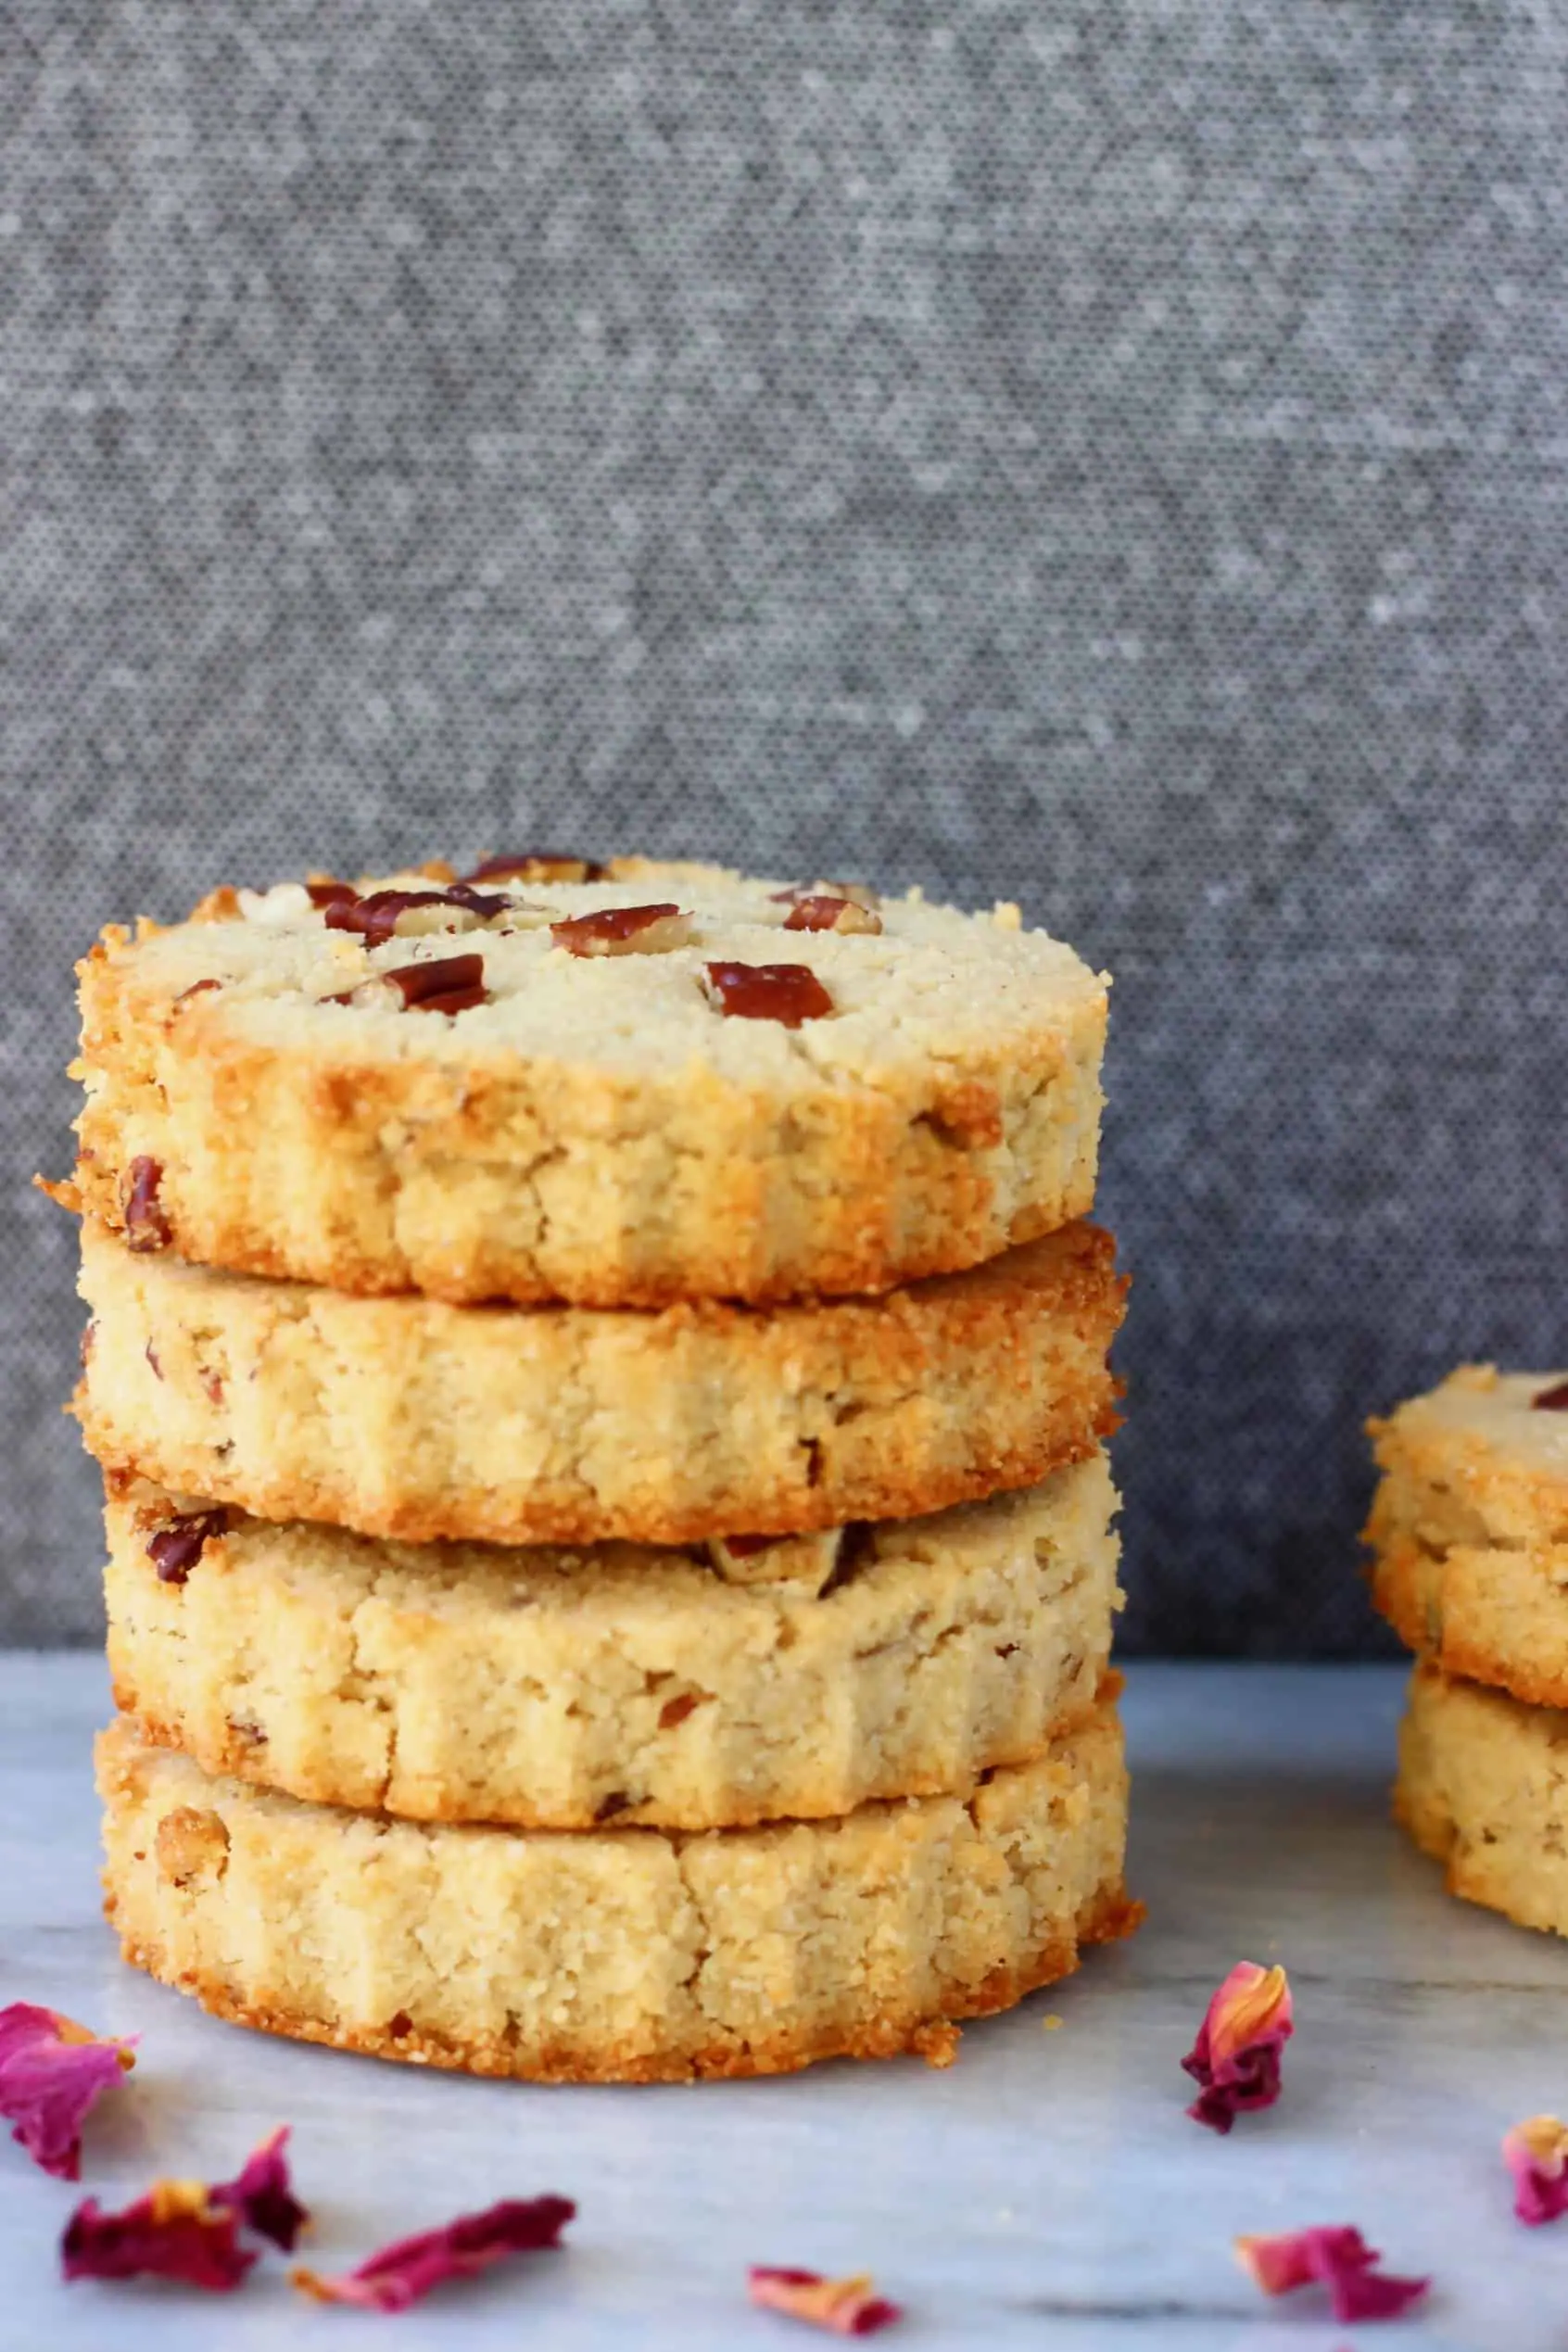 Four circular coconut flour cookies with pecan nuts stacked up on a marble slab against a grey background scattered with rose petals